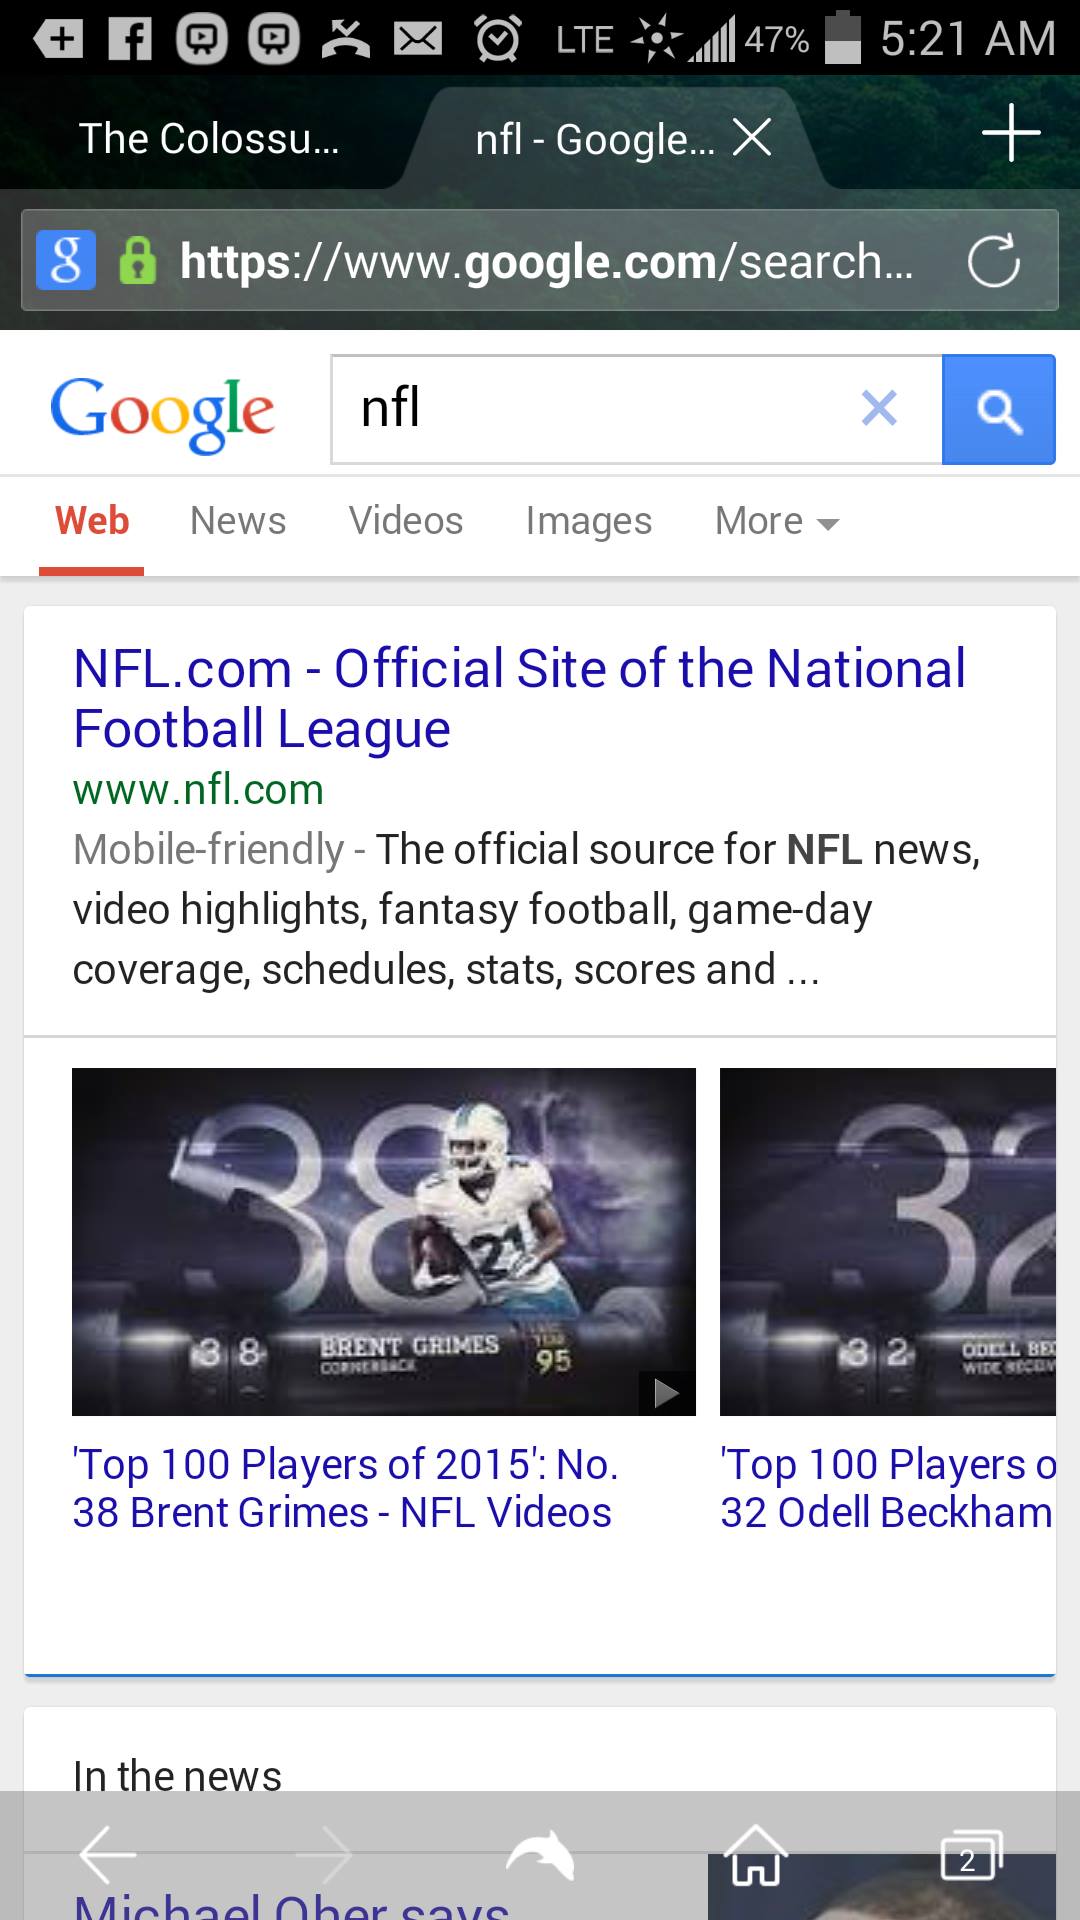 Google Adds Content Carousel to Mobile Search Results